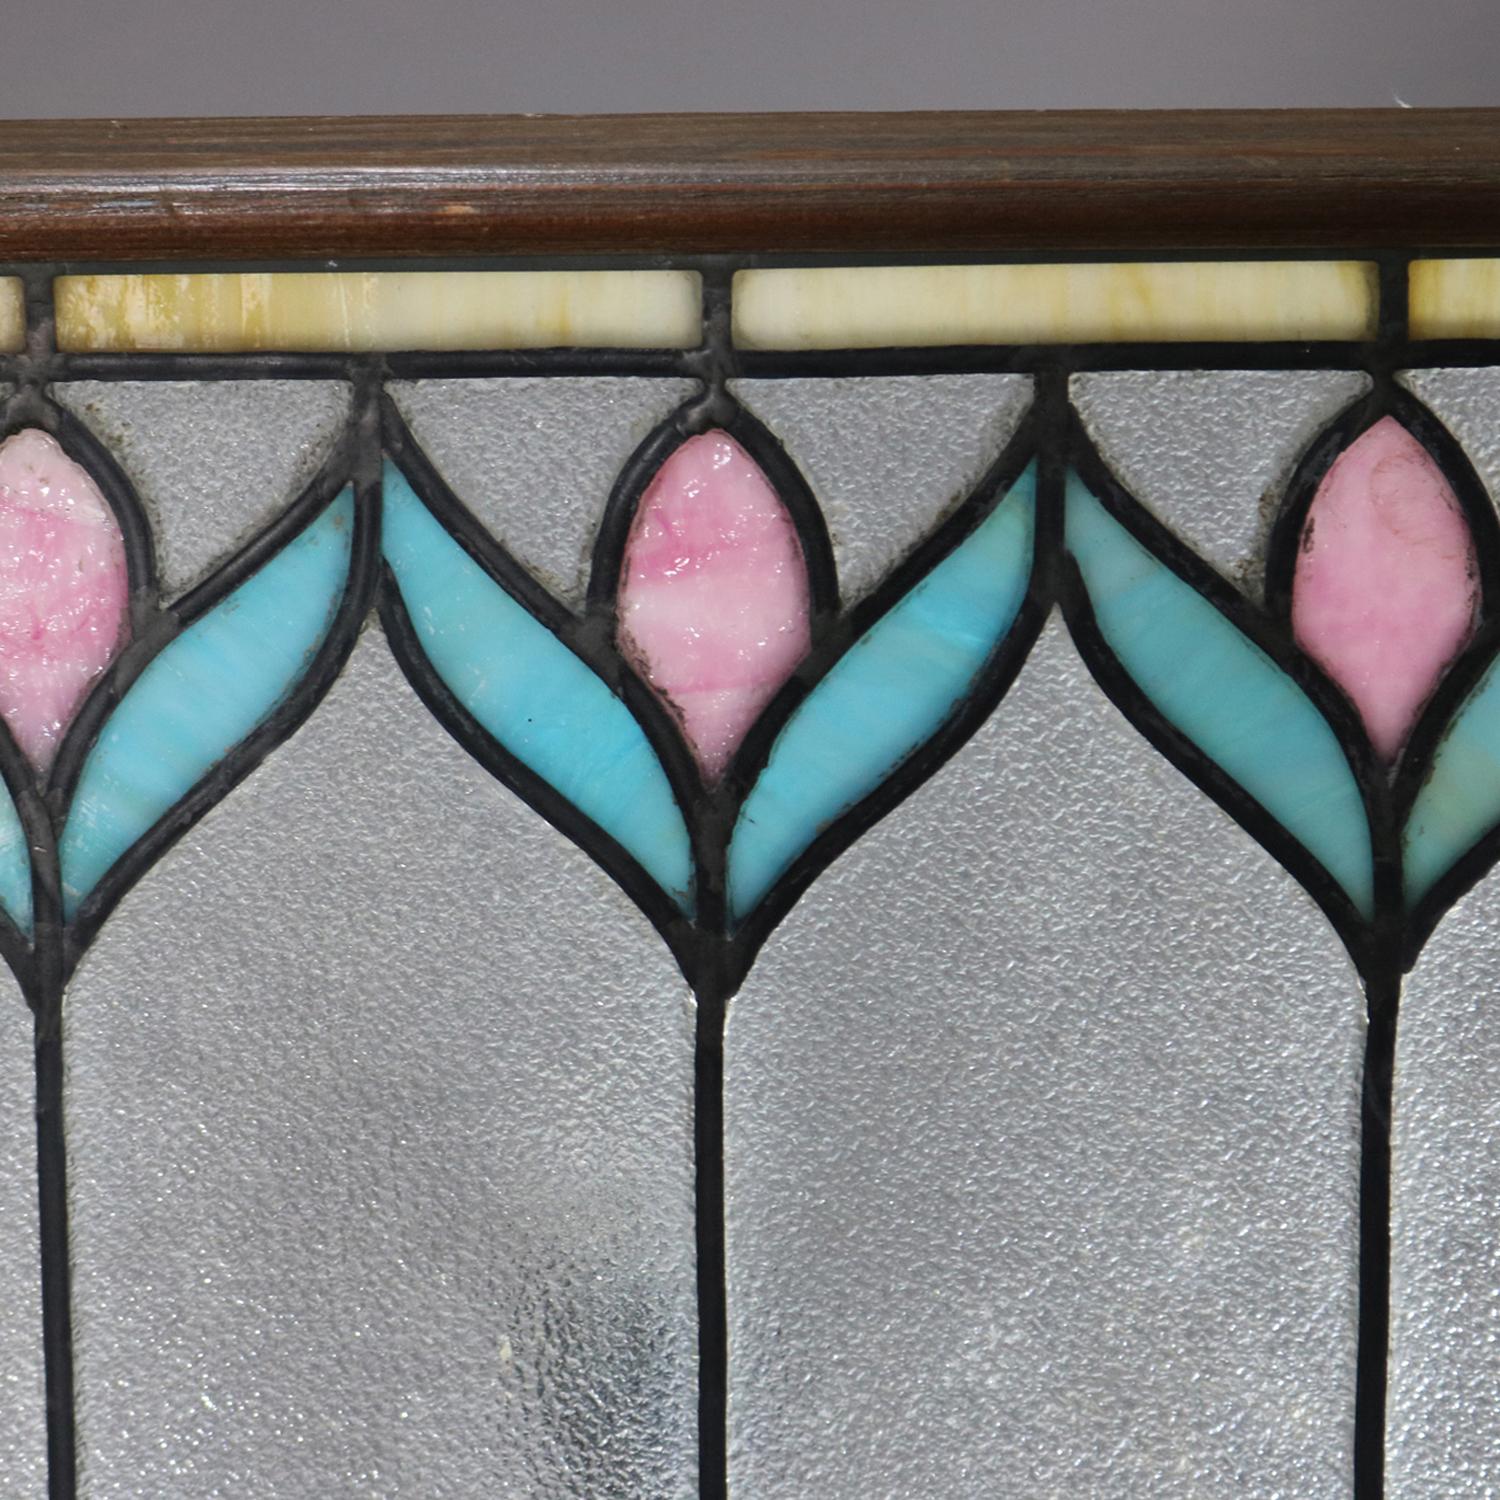 An antique Arts & Crafts window features leaded slag glass repeating stylized flower design, seated in frame, circa 1910.

***DELIVERY NOTICE – Due to COVID-19 we are employing NO-CONTACT PRACTICES in the transfer of purchased items.  Additionally,